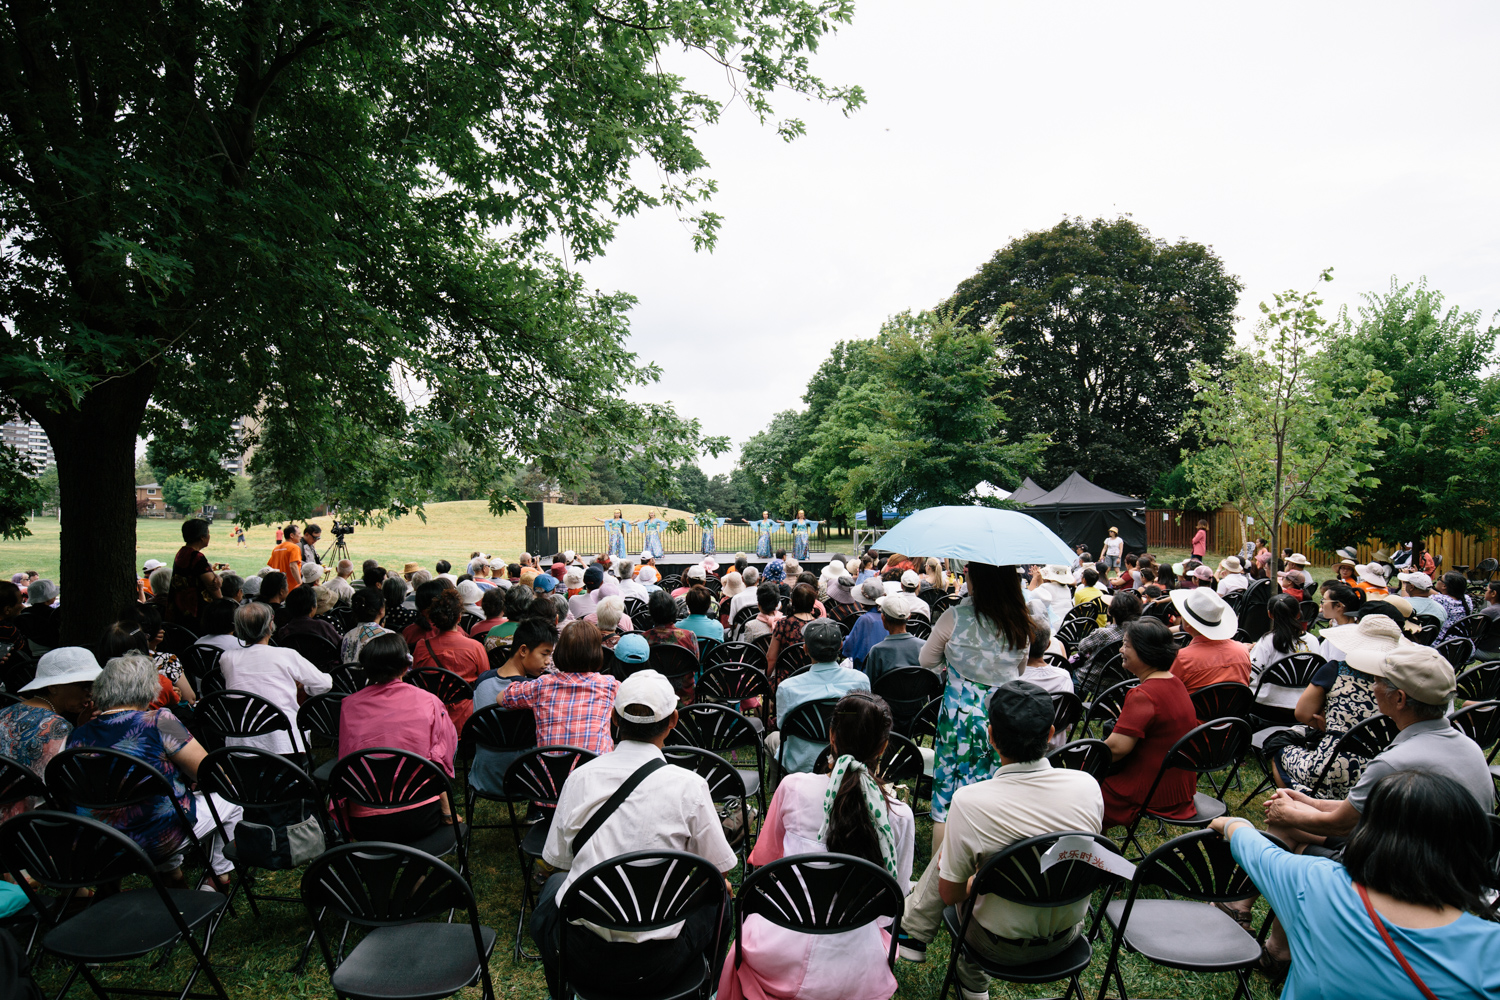 View from the back of a large audience under the trees watching the event.